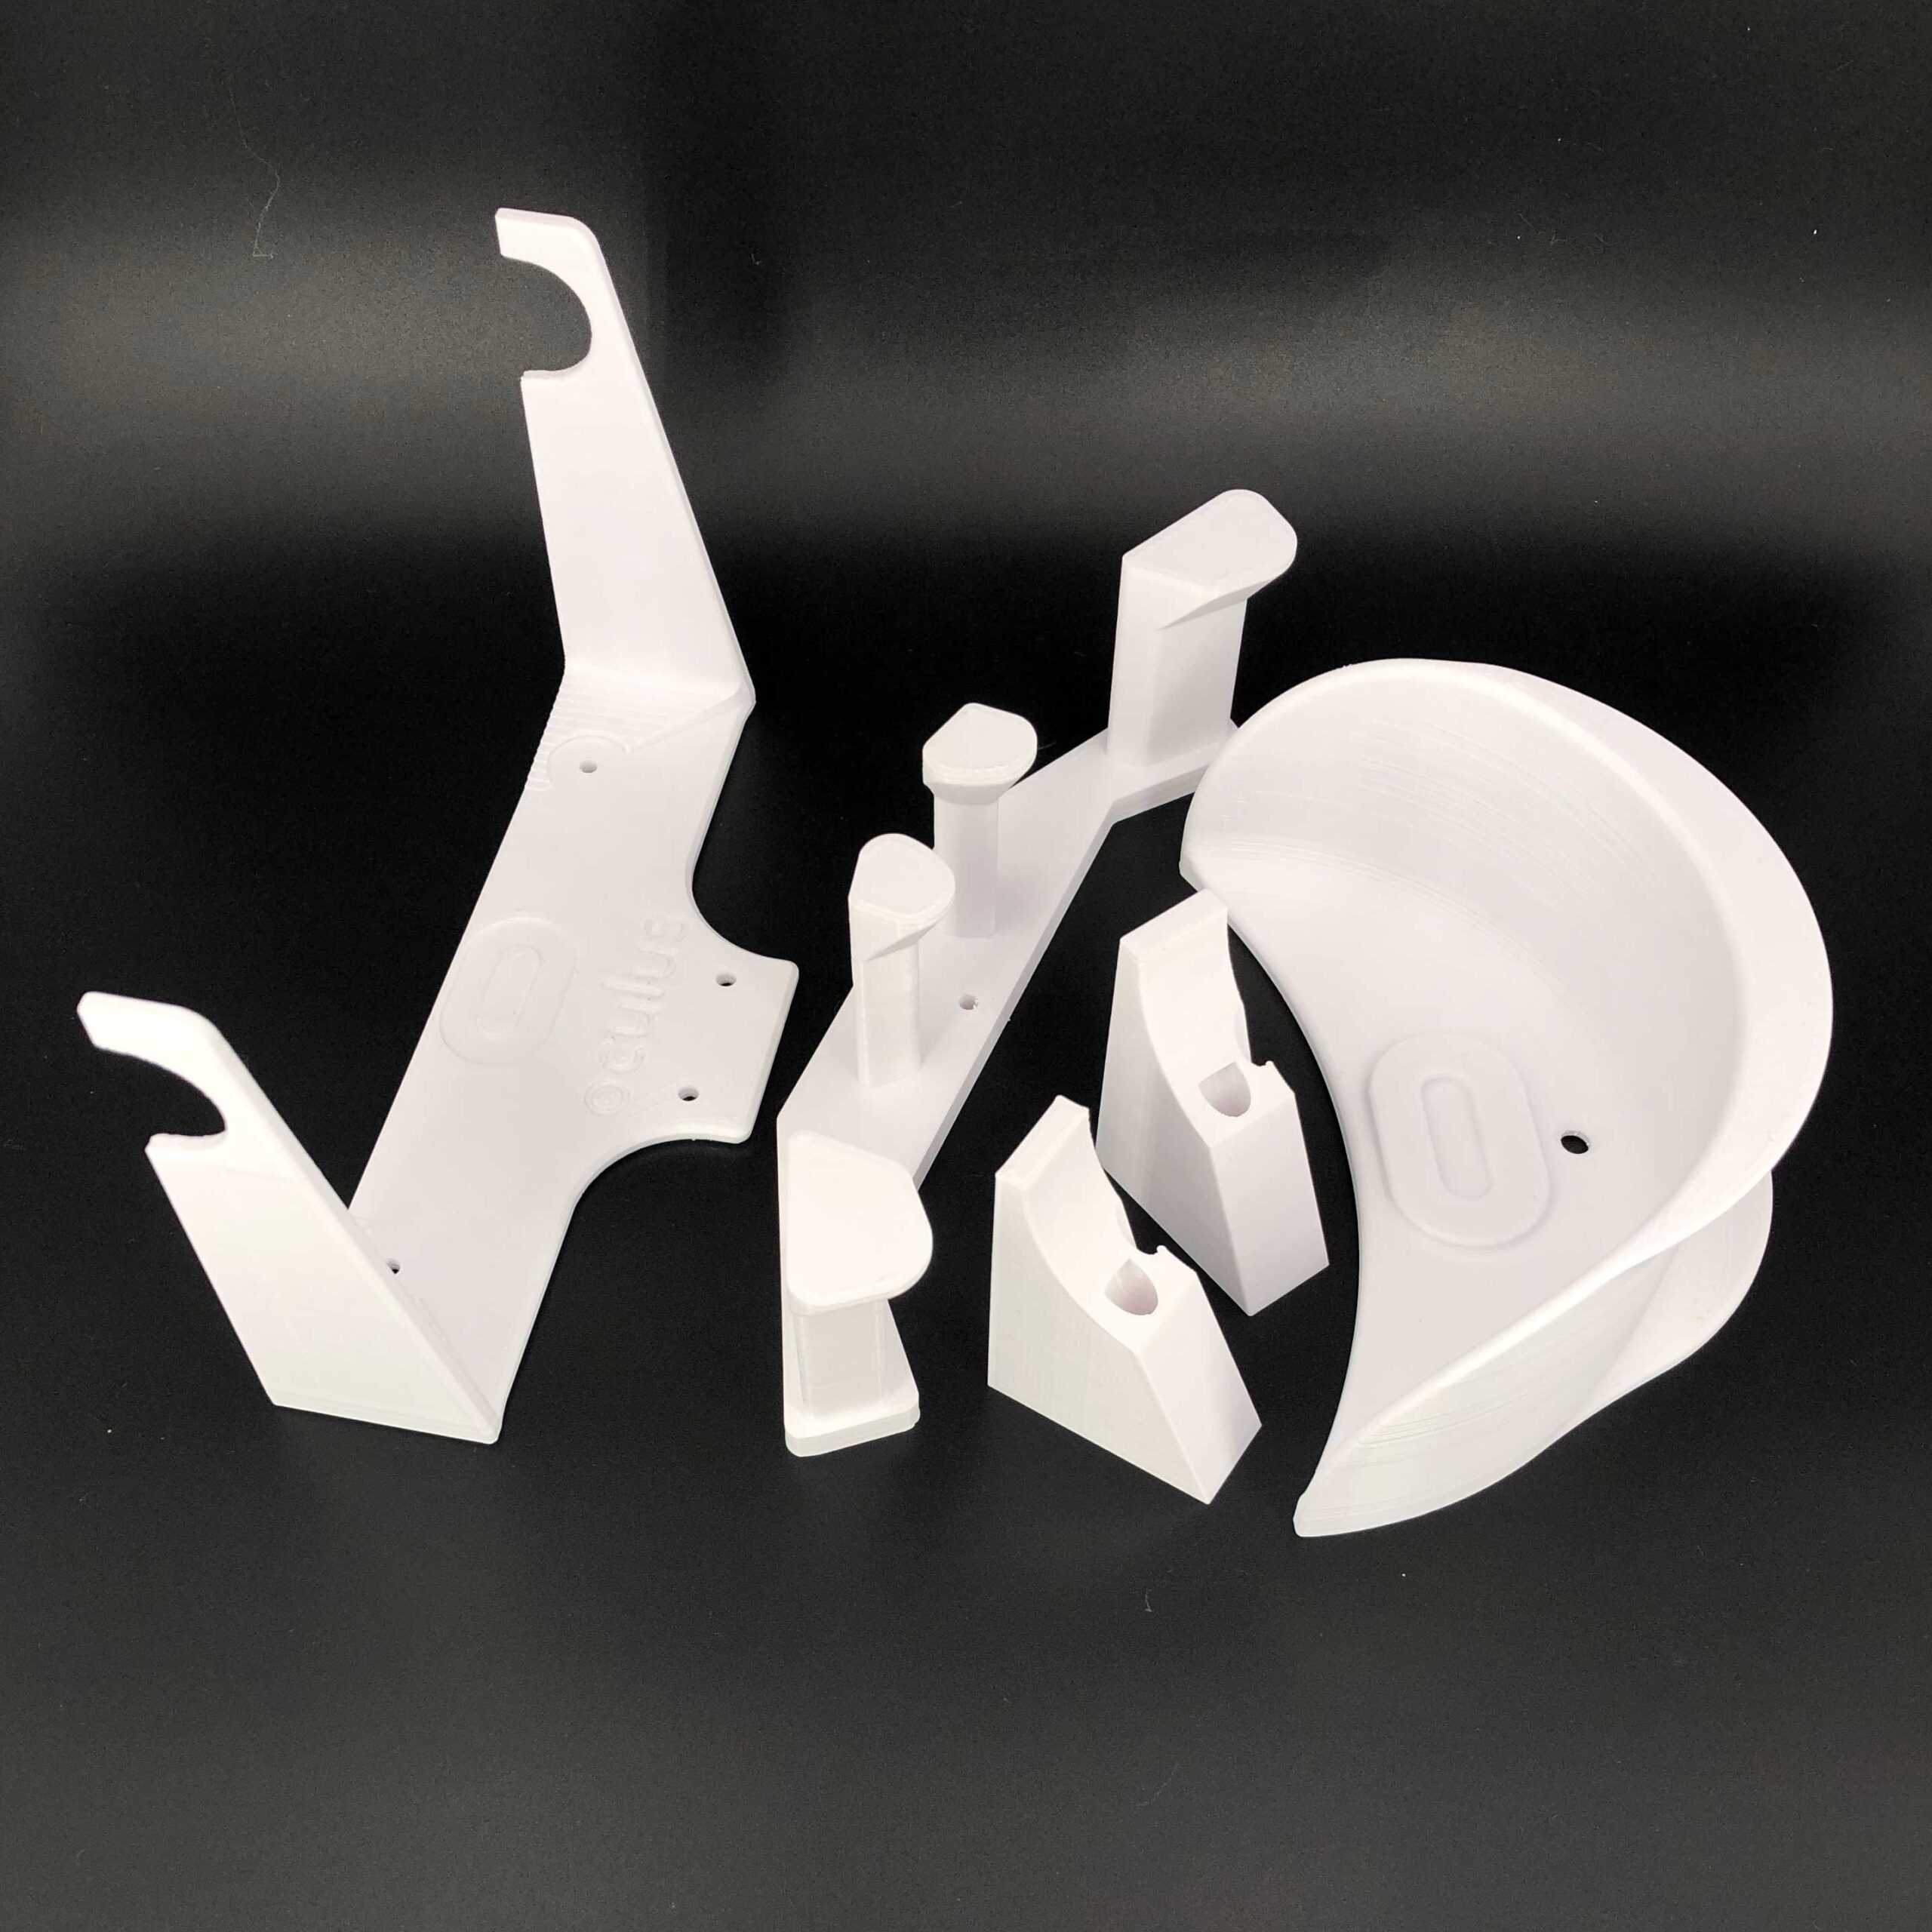 3D printed oculus accessories made of PLA filament in white by a 3D printing service in Sweden